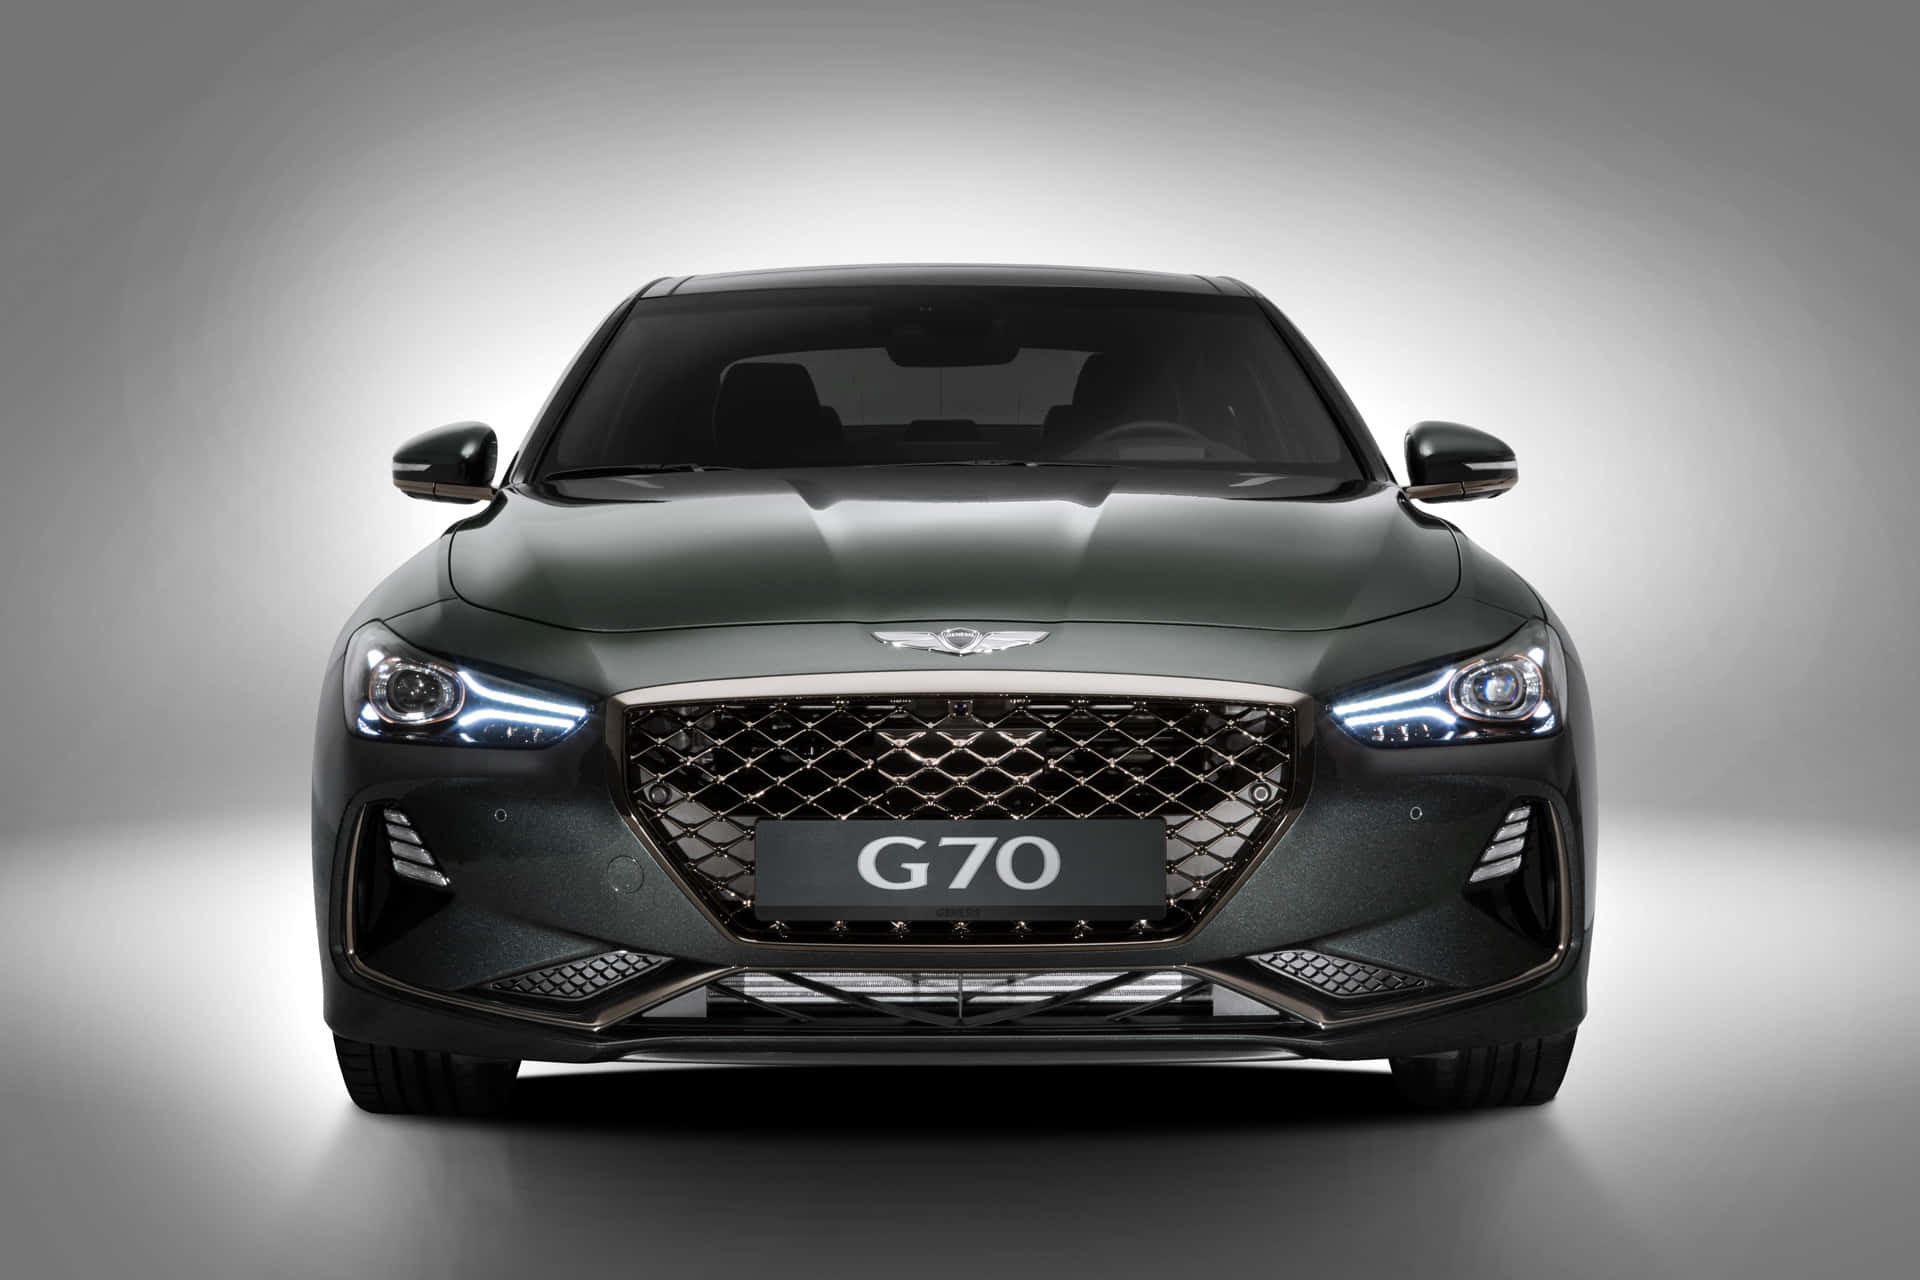 "Experience the luxury of a Genesis G90"